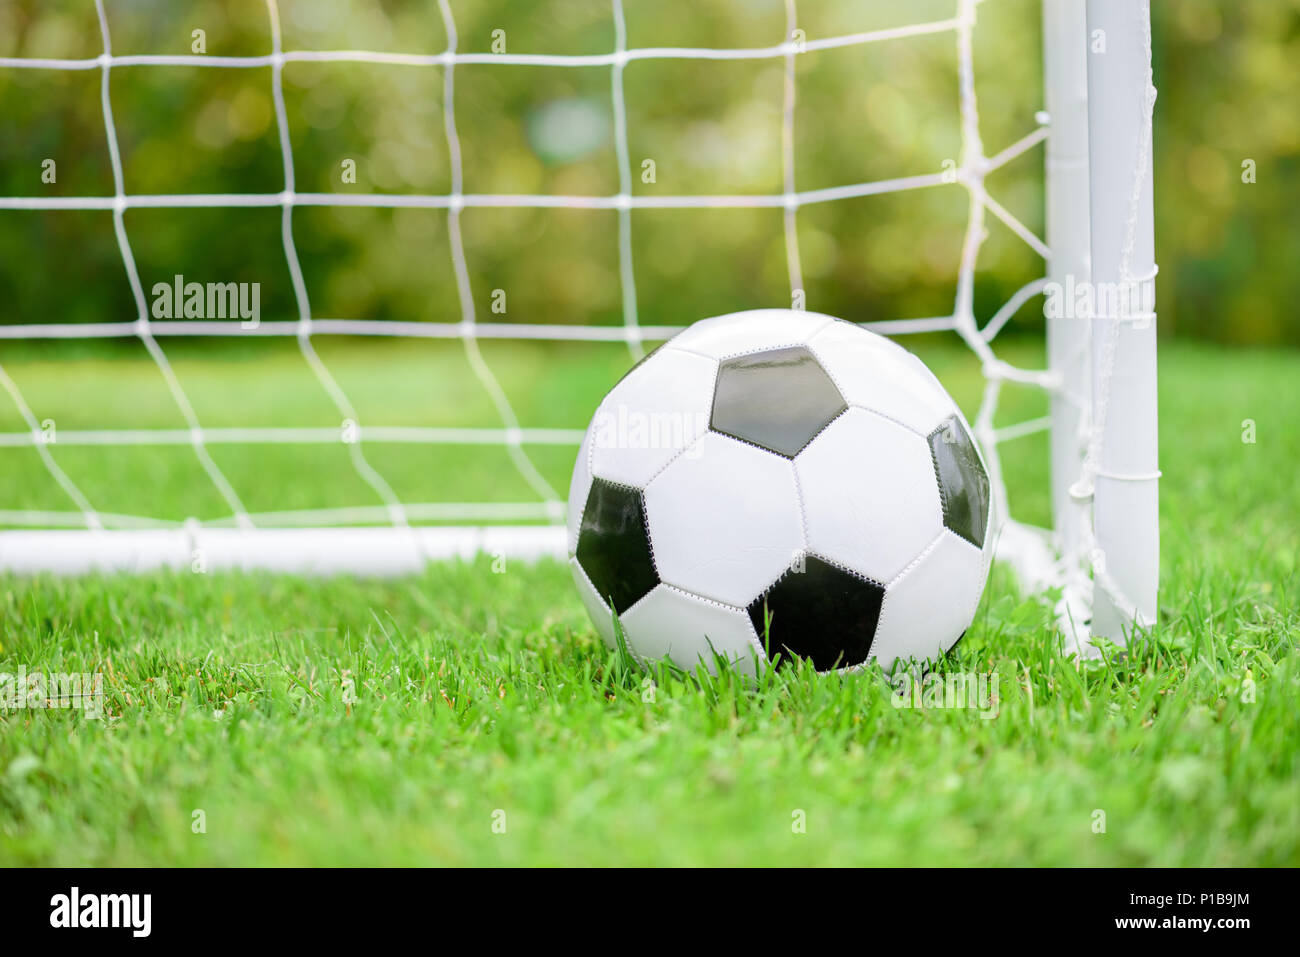 Classic Football Soccer Ball On Green Grass Ground In Front Of White Goal With Net Stock Photo Alamy